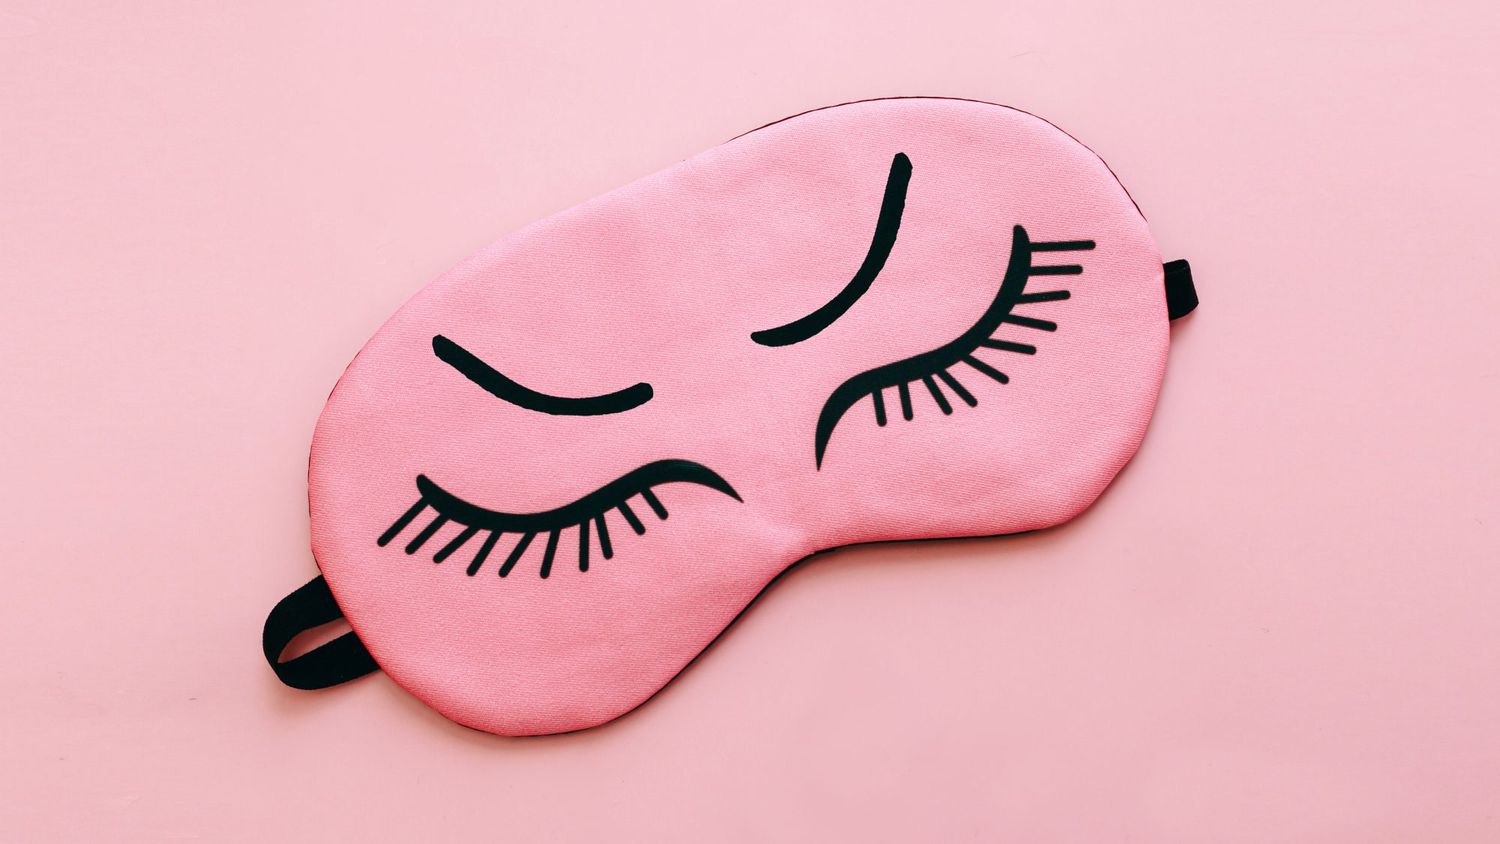 Pink sleep mask, vitamins capsules over pink background. Concept of sleep, health care and daily routine.